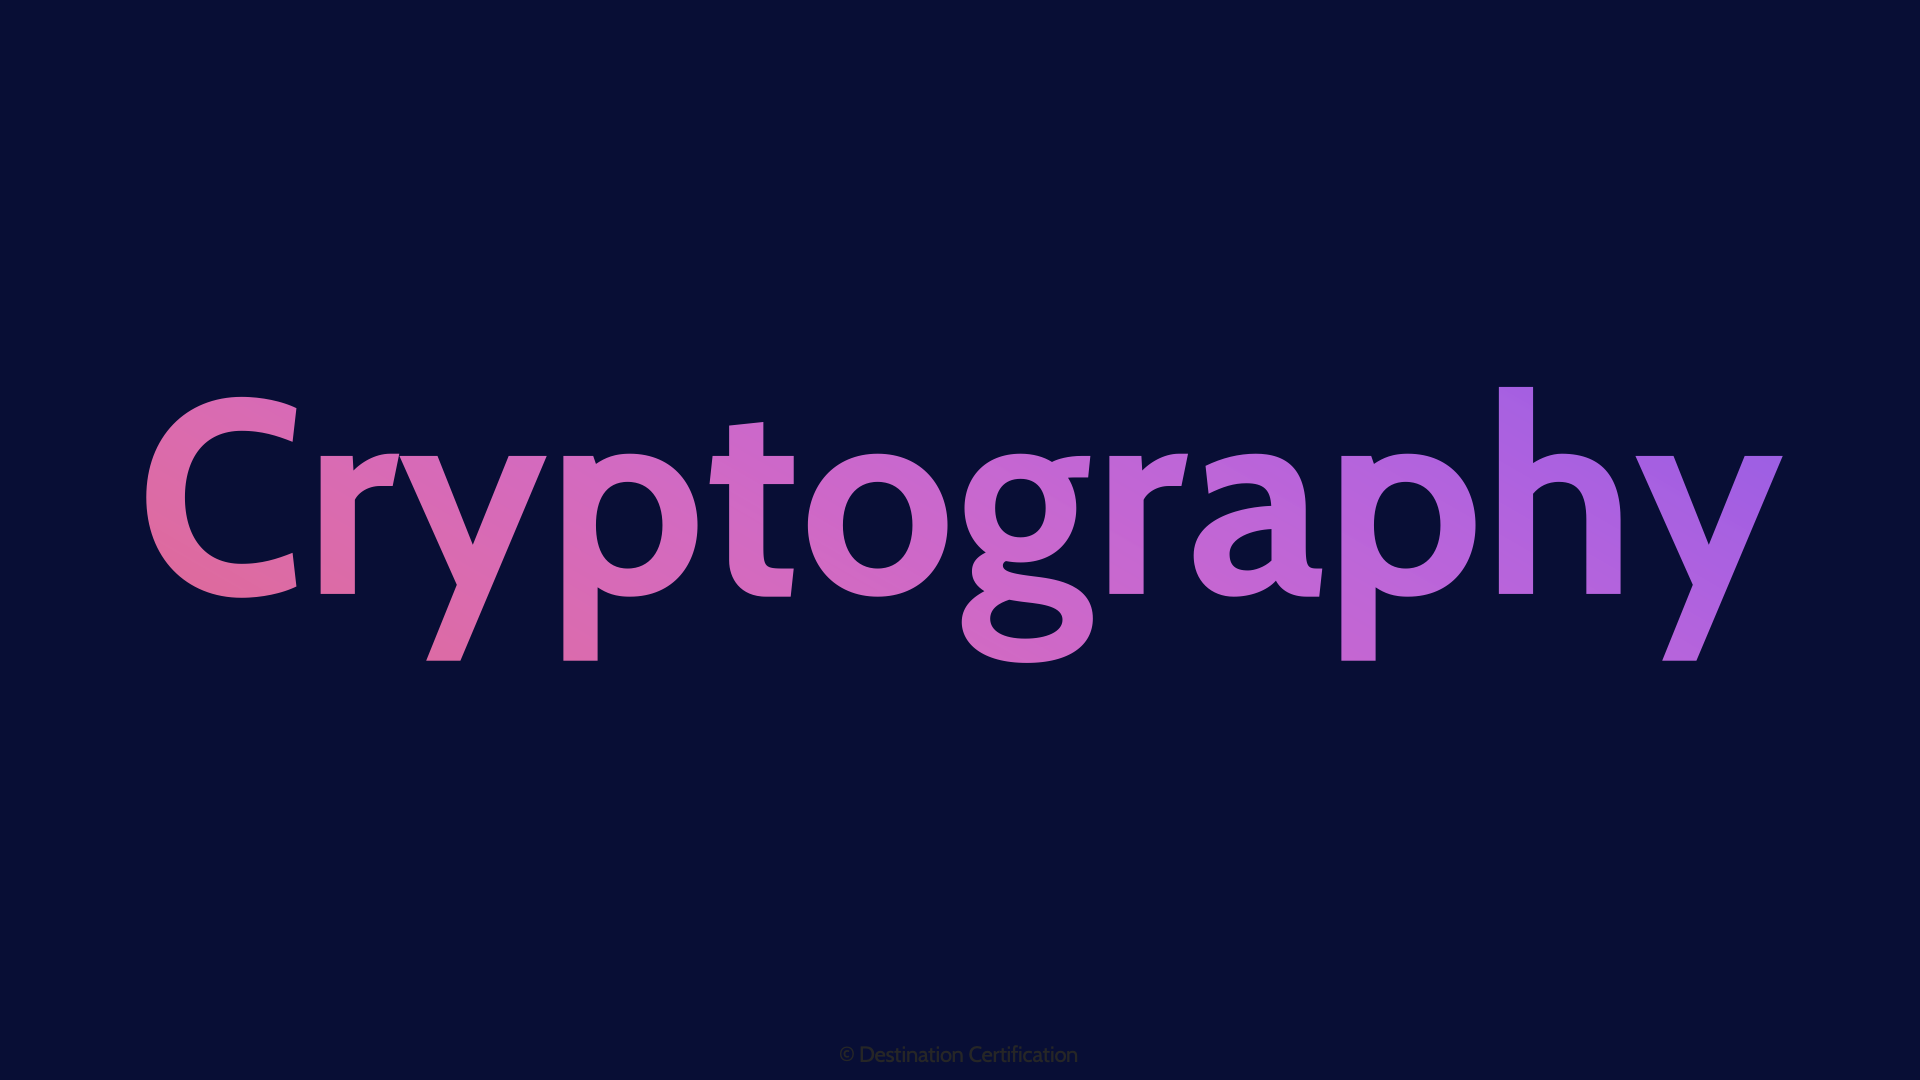 Image of a word cryptography written in pink and purple gradient - Destination Certification